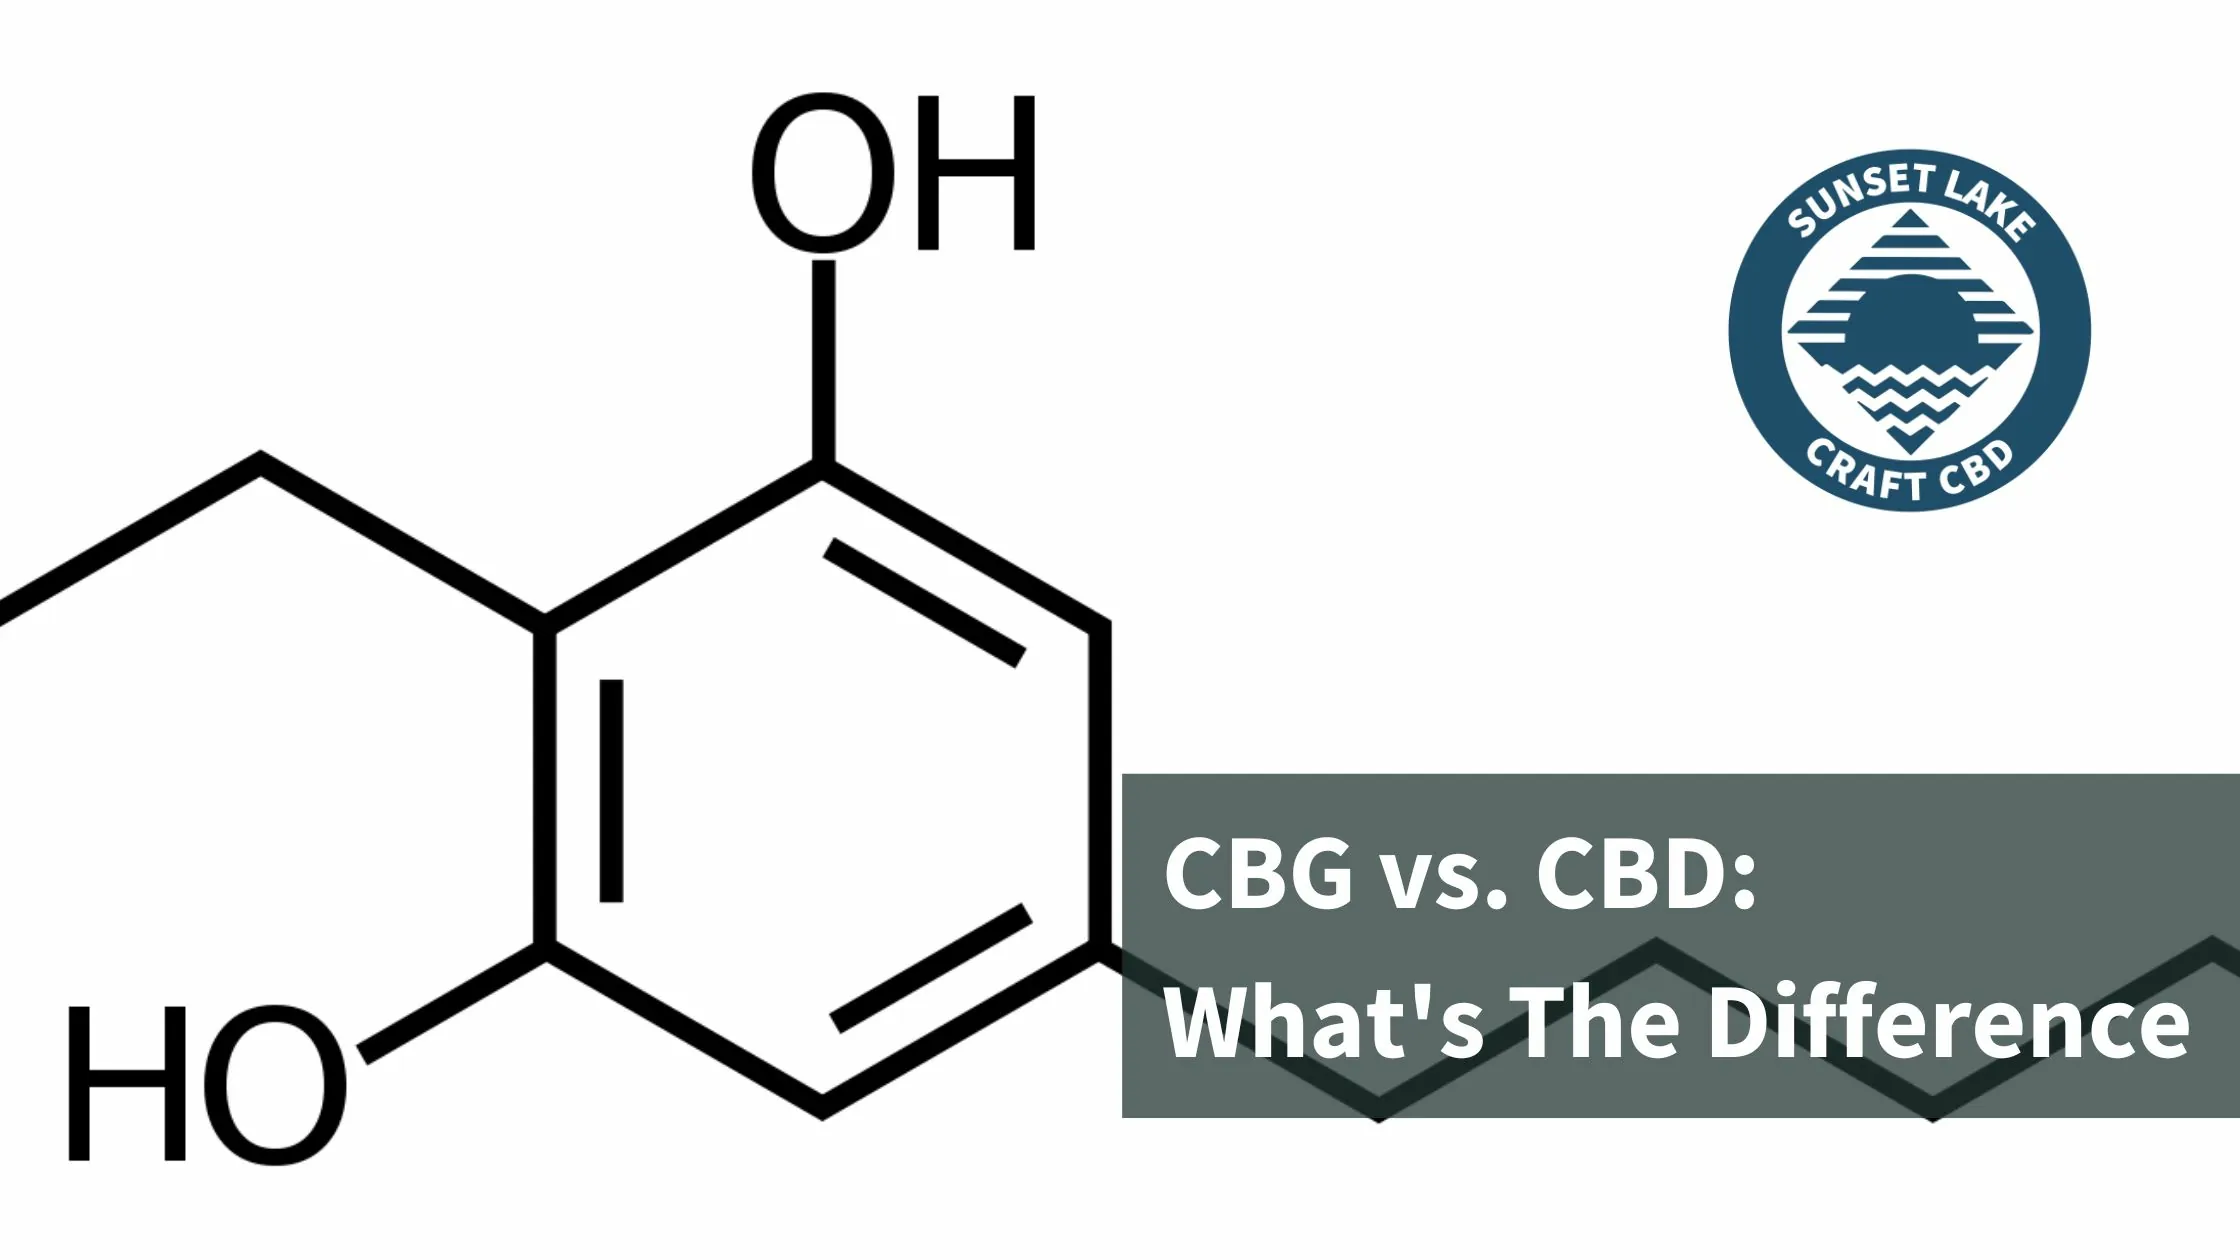 CBG vs. CBD: What’s the Difference?